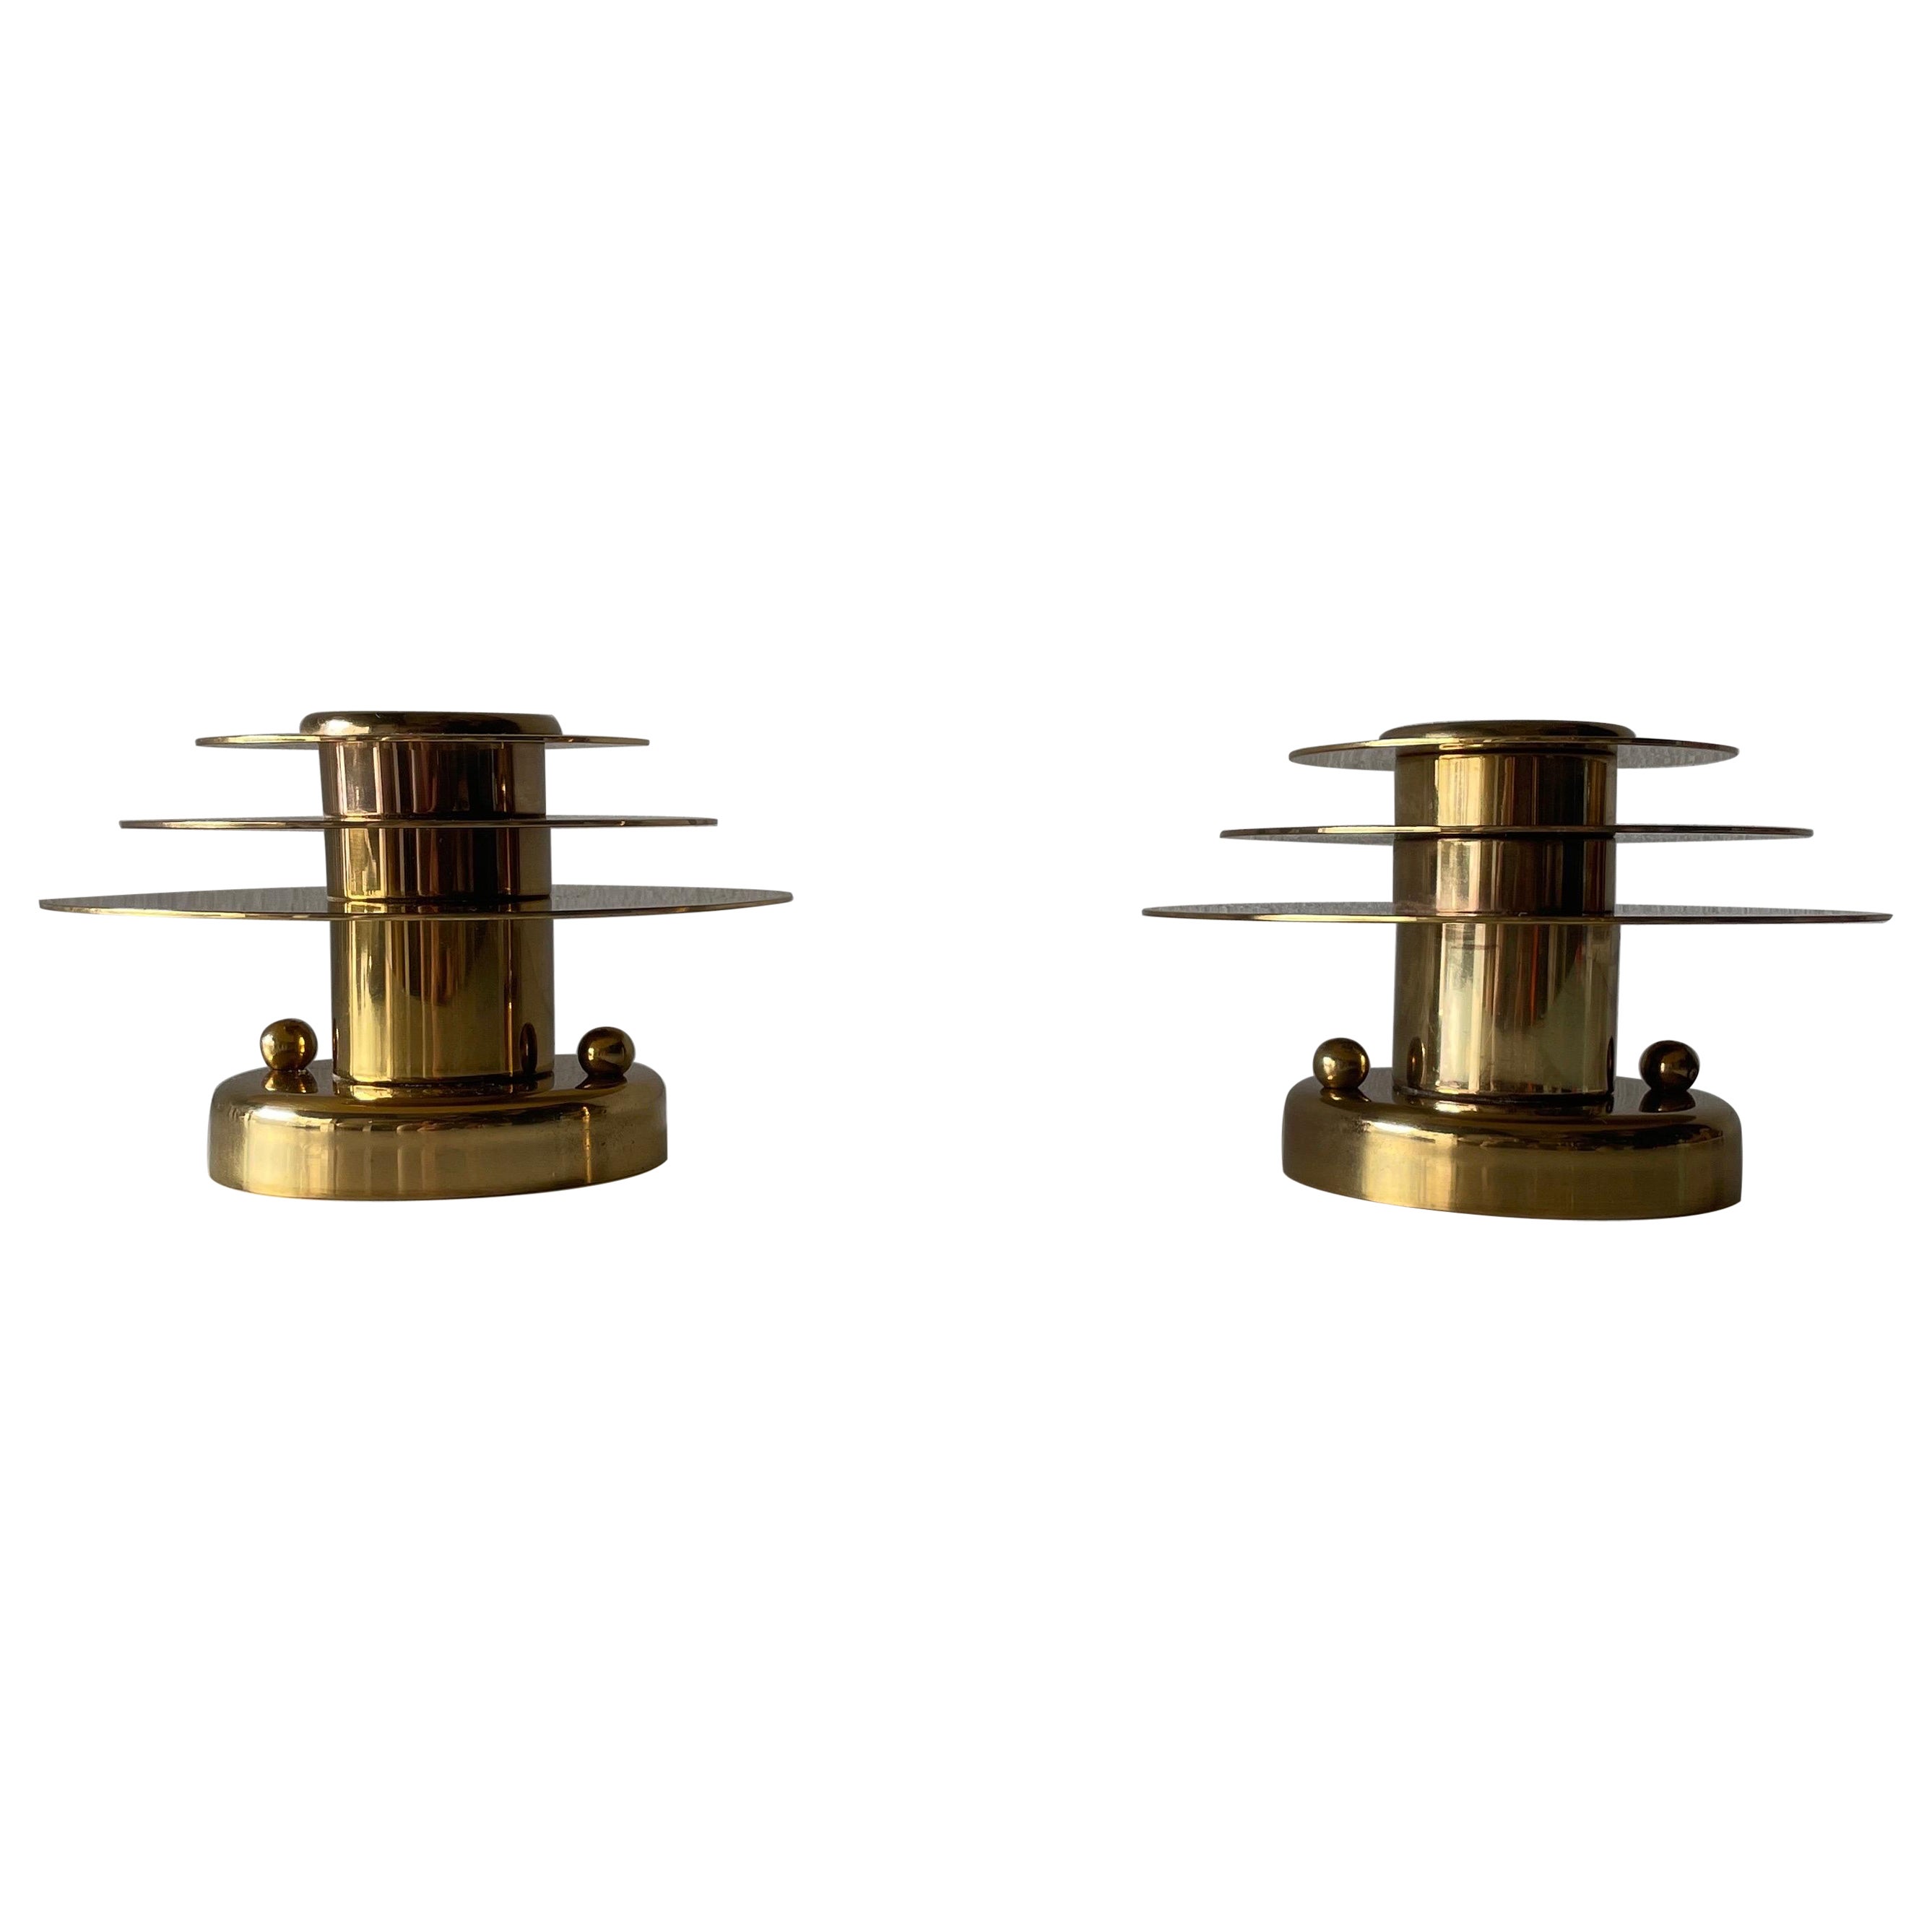 Modernist Brass Pair of Sconces or Ceiling Lamp by Schröder & Co, 1960s, Germany For Sale